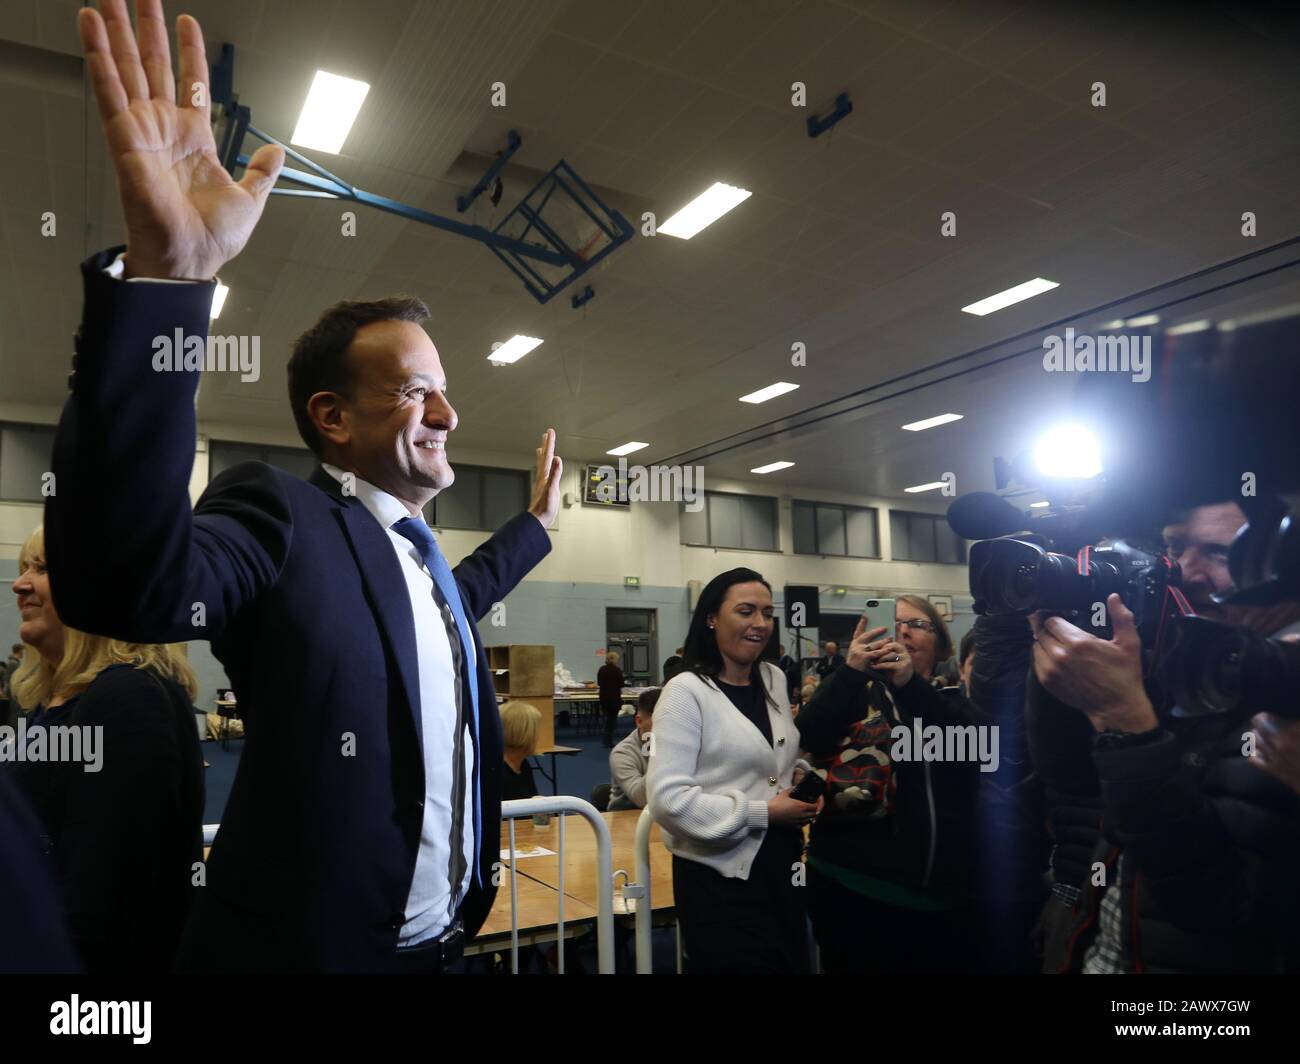 Dublin, Ireland. 9th Feb 2020. General Election Results. Counting of Ballots. Ballot papers in the Phibblestown Community Centre in Dublin West. Taoiseach and Fine Gael leader Leo Varadkar celebrates after being elected at the Count Centre. Photo: Eamonn Farrell/RollingNews.ie Credit: RollingNews.ie/Alamy Live News Stock Photo